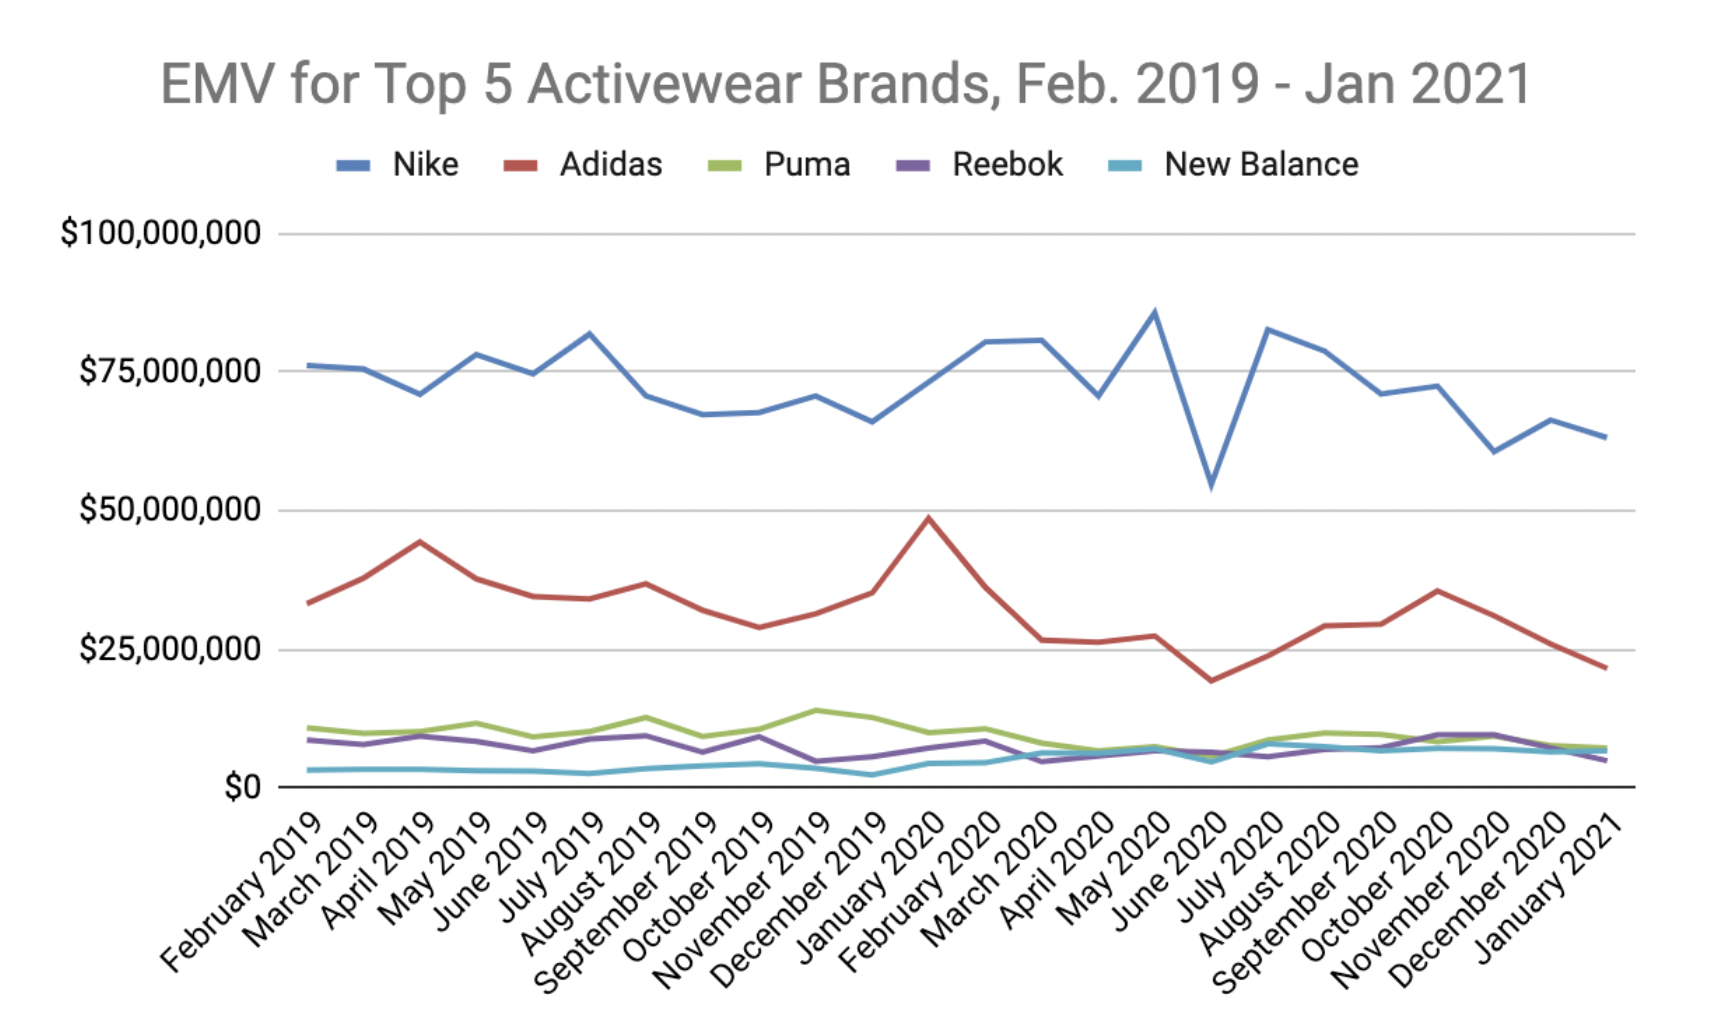 A line graph displaying monthly EMV for the 5 top activewear brands from February 2020 to January 2021. 